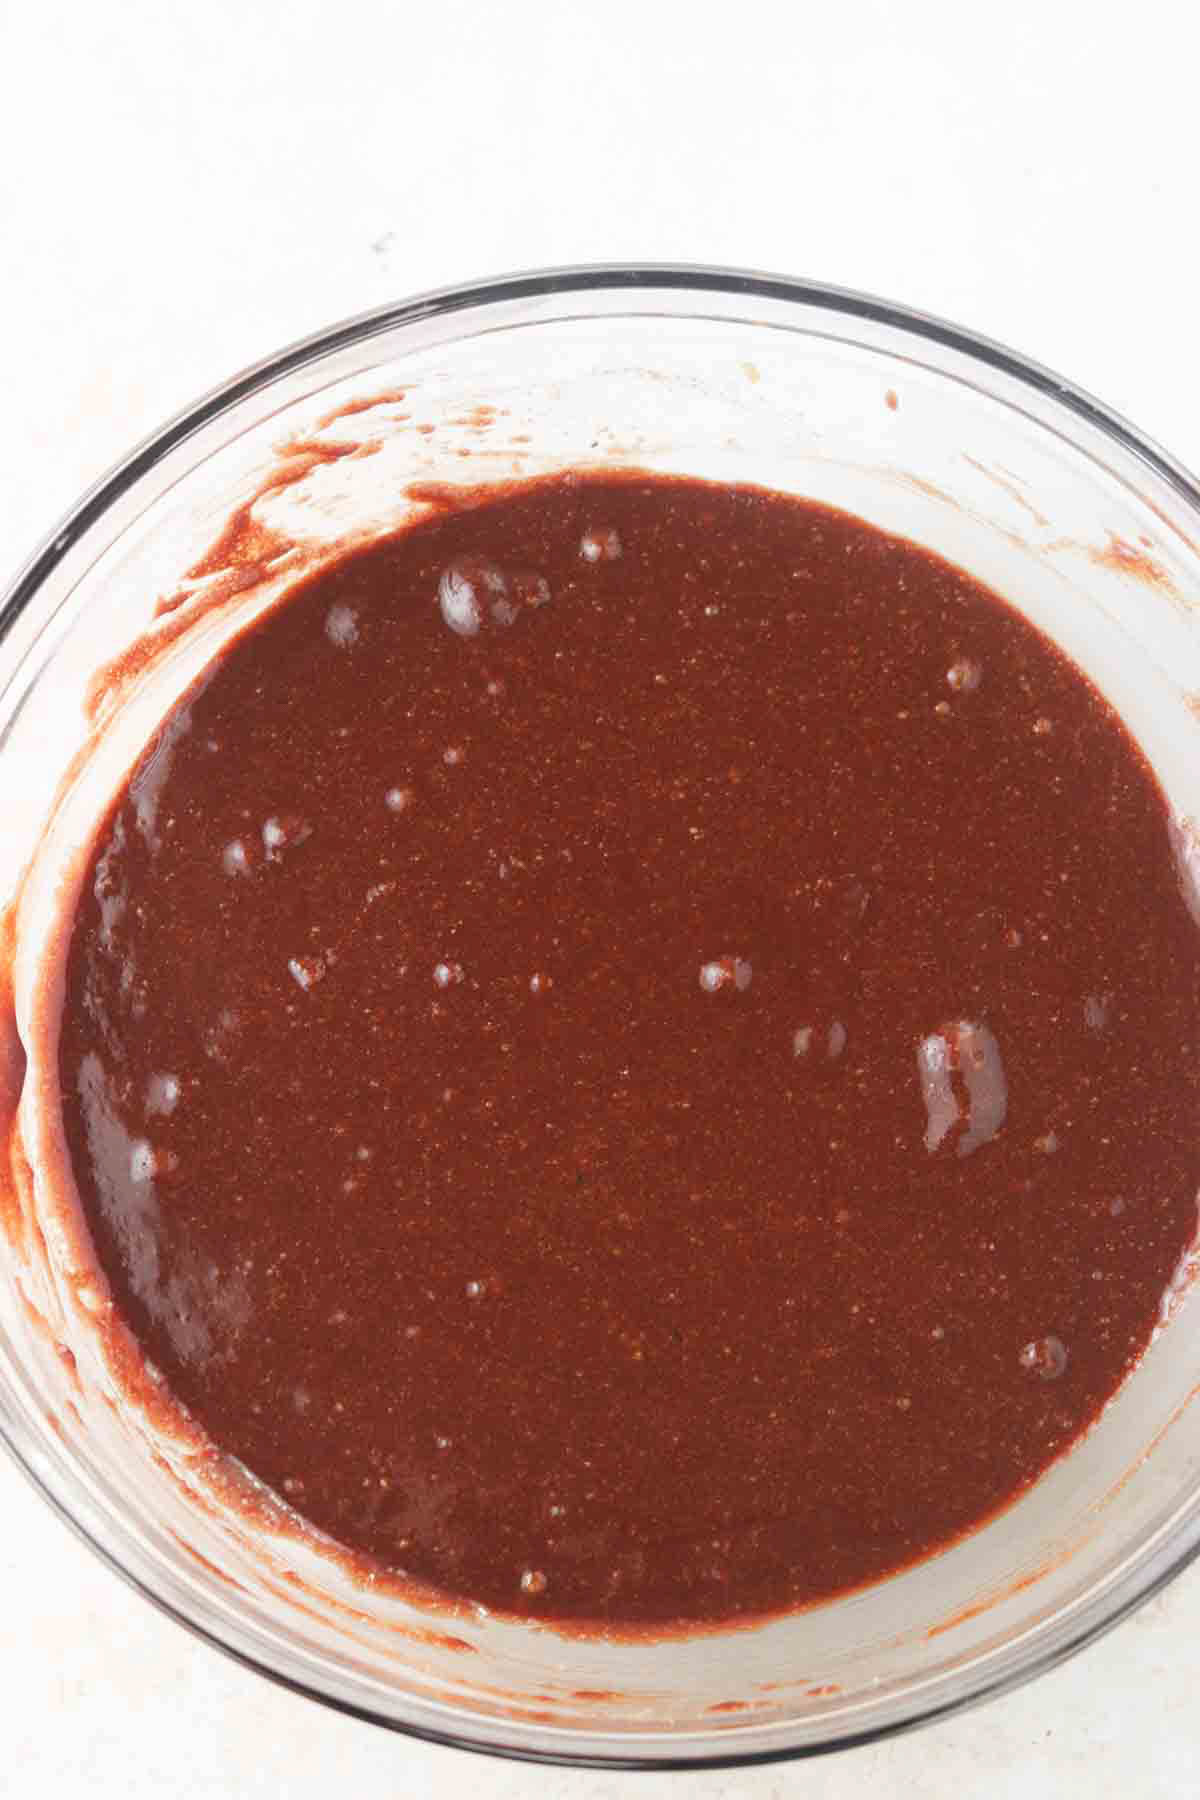 Diary free brownie batter mixed together in a glass mixing bowl. 